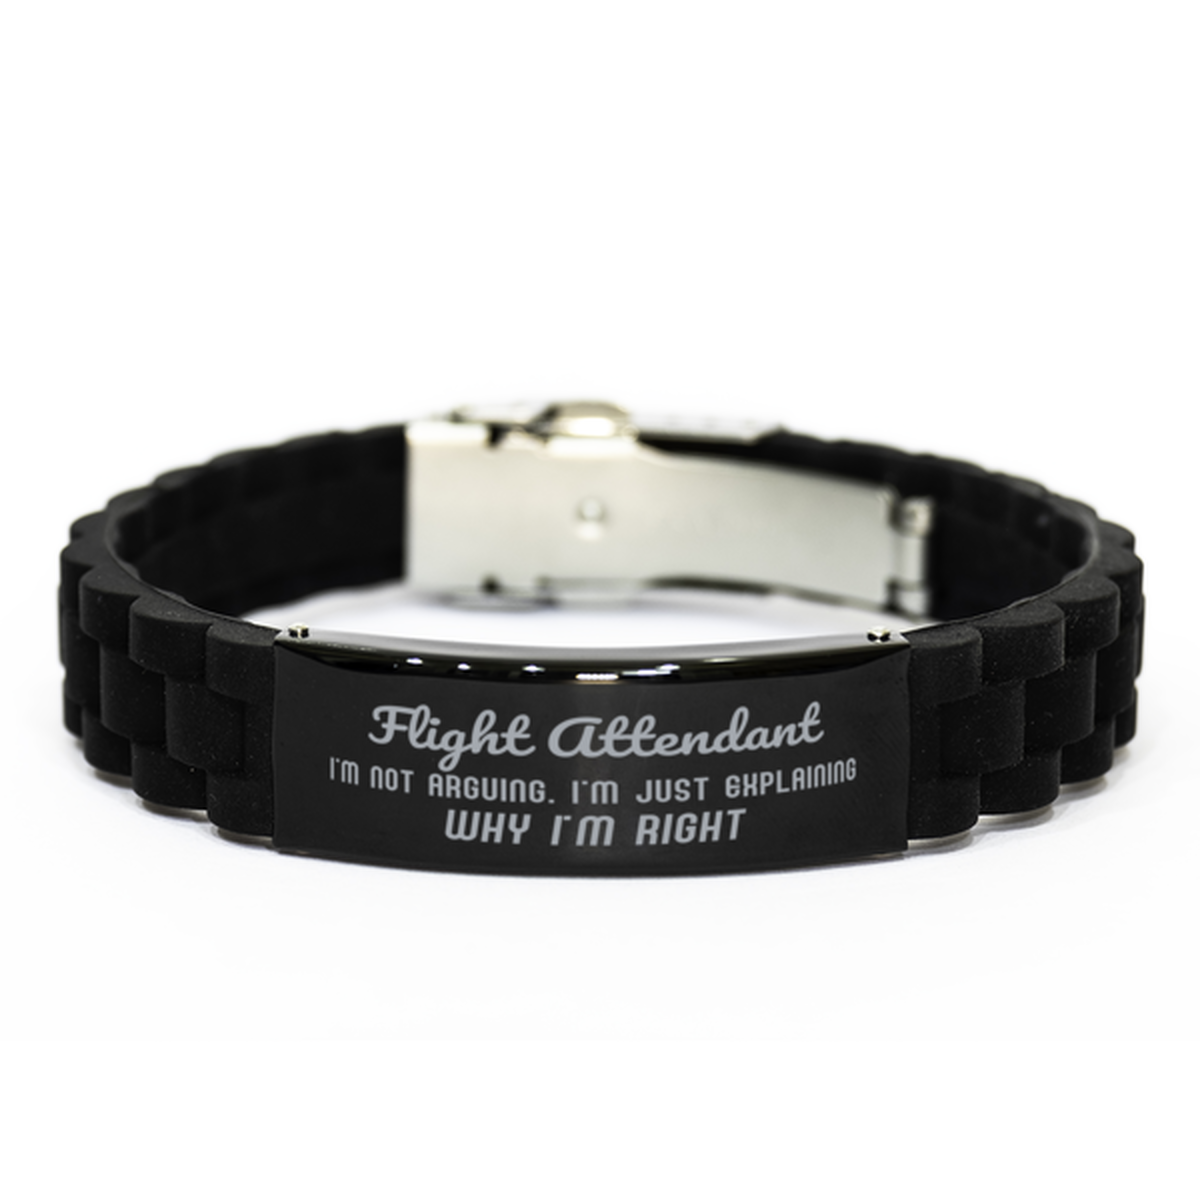 Flight Attendant I'm not Arguing. I'm Just Explaining Why I'm RIGHT Black Glidelock Clasp Bracelet, Funny Saying Quote Flight Attendant Gifts For Flight Attendant Graduation Birthday Christmas Gifts for Men Women Coworker